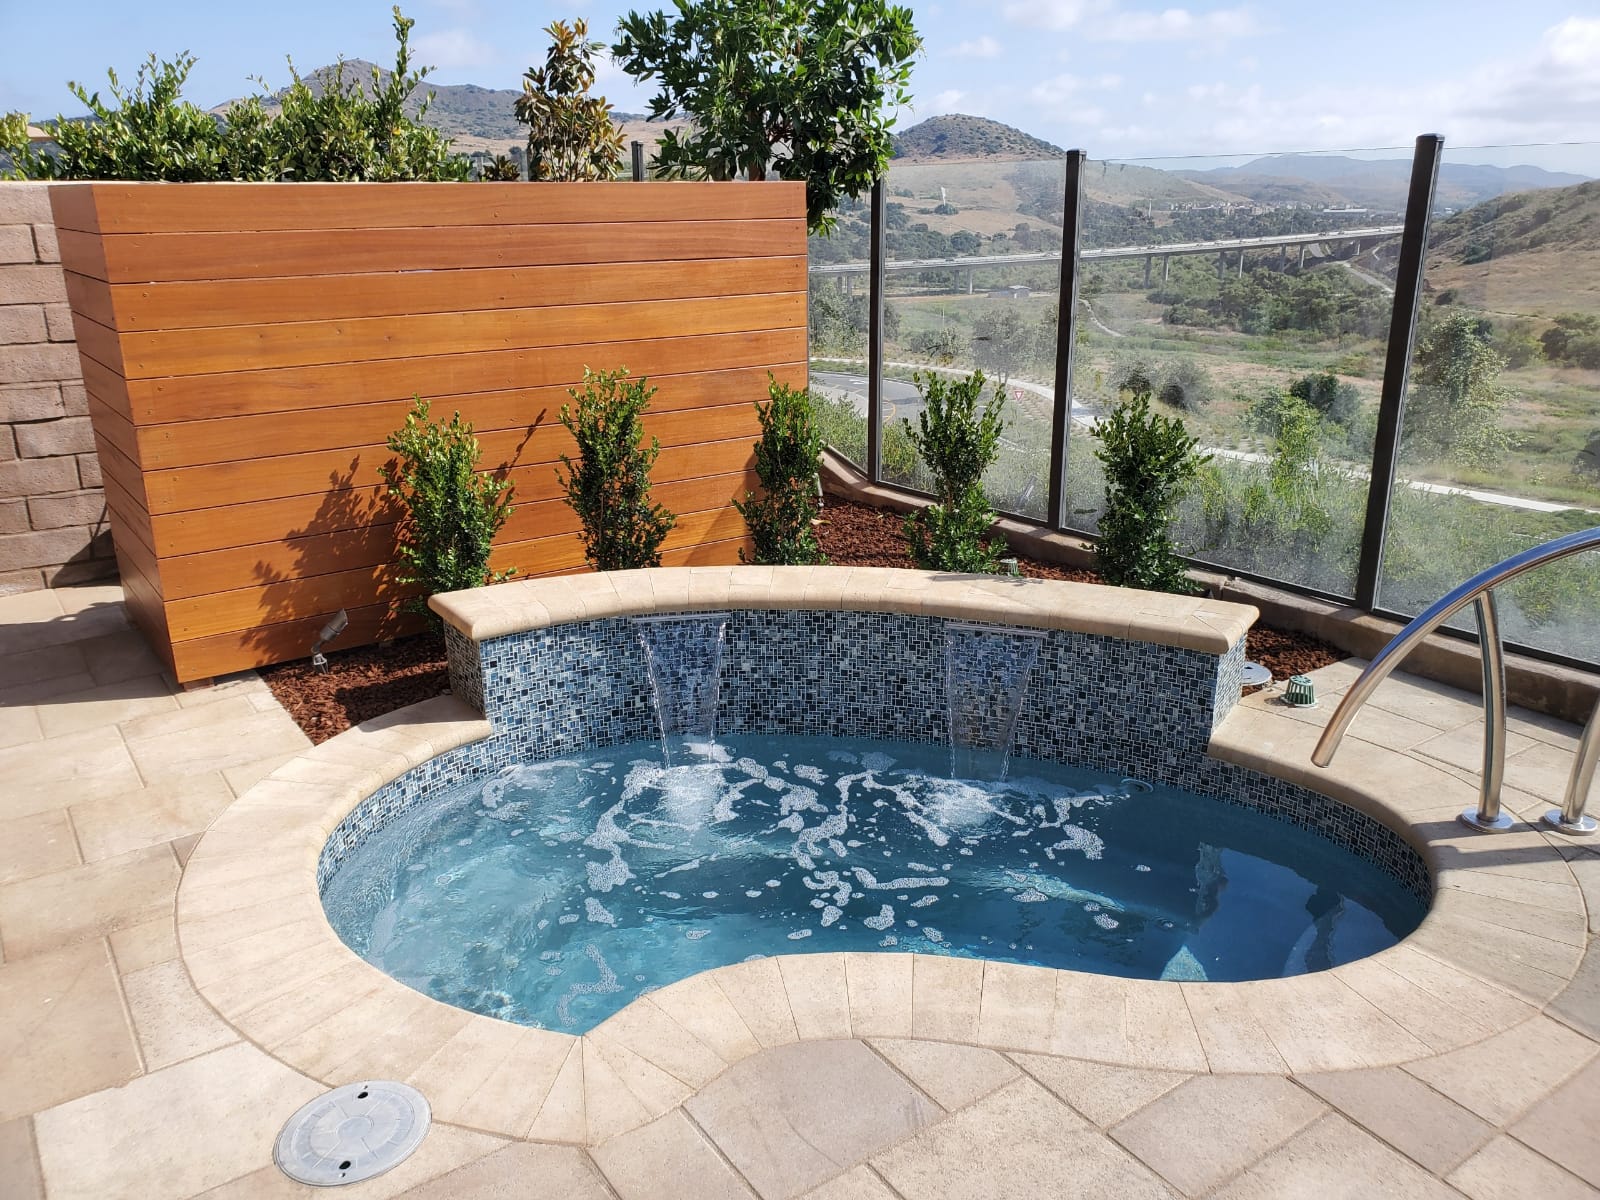 The Royale Spa is a stunning fiberglass spa designed to soothe and relax the soul. Perfectly paired with outdoor landscaping, the Royale Spa blends right into any outdoor oasis!